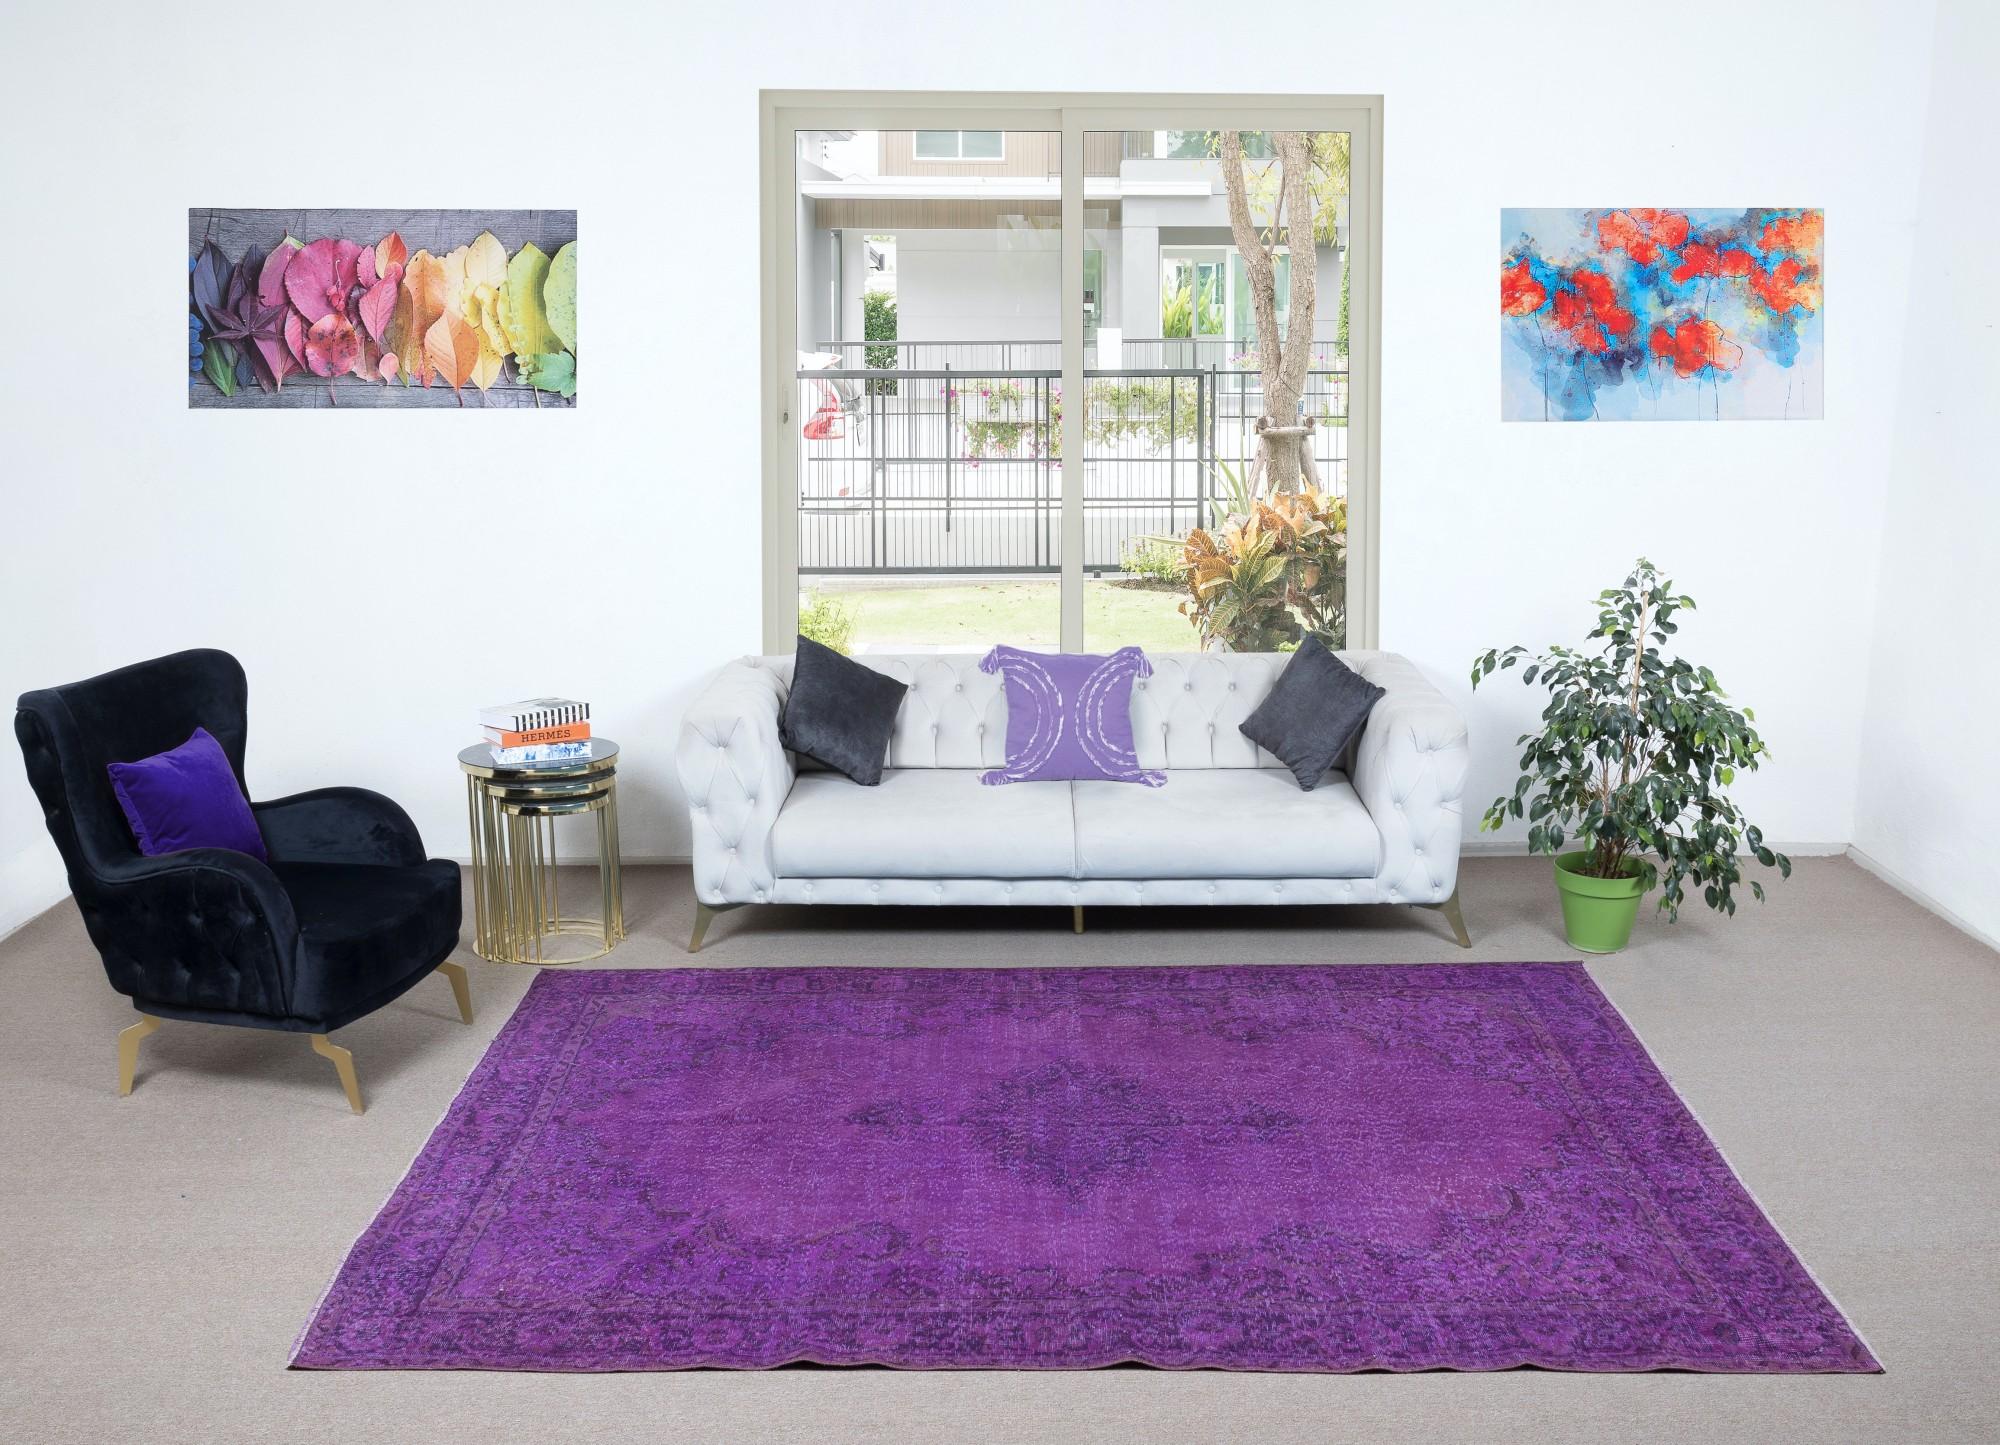 7x10 Ft Handmade Turkish Purple Area Rug, Ideal for Modern Interiors In Good Condition For Sale In Philadelphia, PA